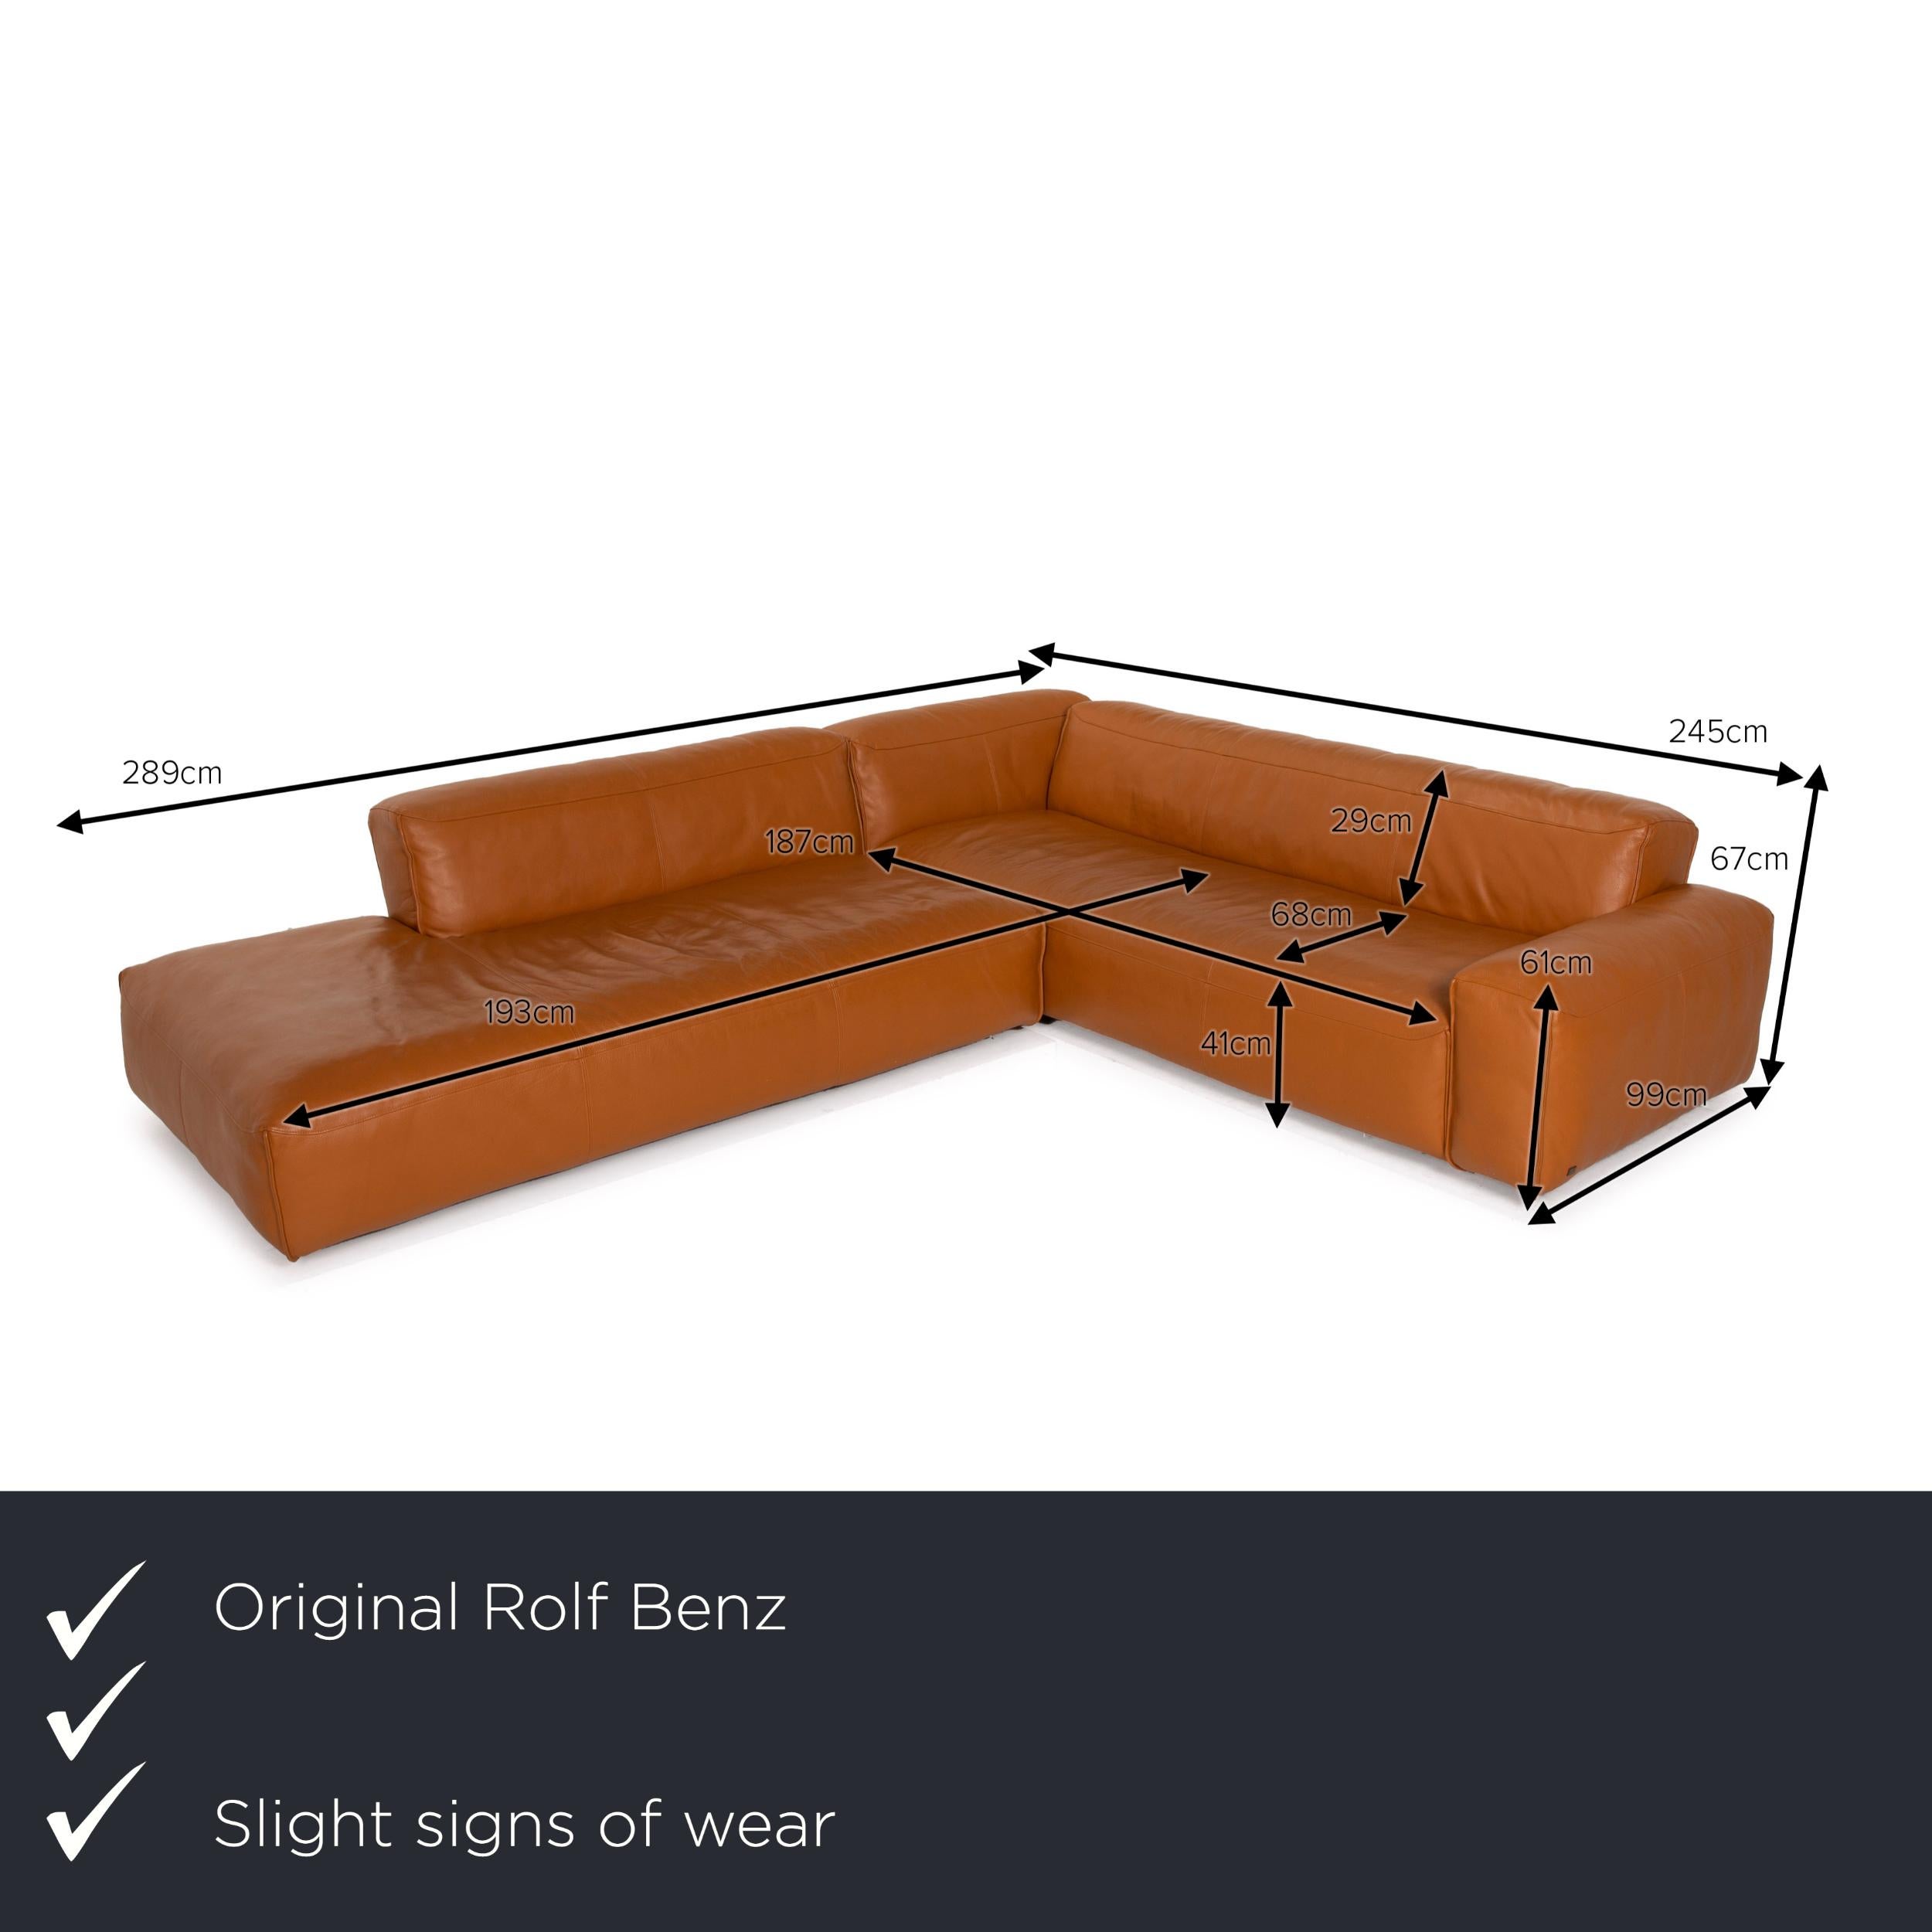 We present to you a Rolf Benz Mio leather sofa cognac corner sofa.
 
 

 Product measurements in centimeters:
 

Depth: 99
Width: 289
Height: 67
Seat height: 41
Rest height: 61
Seat depth: 68
Seat width: 187
Back height: 29.